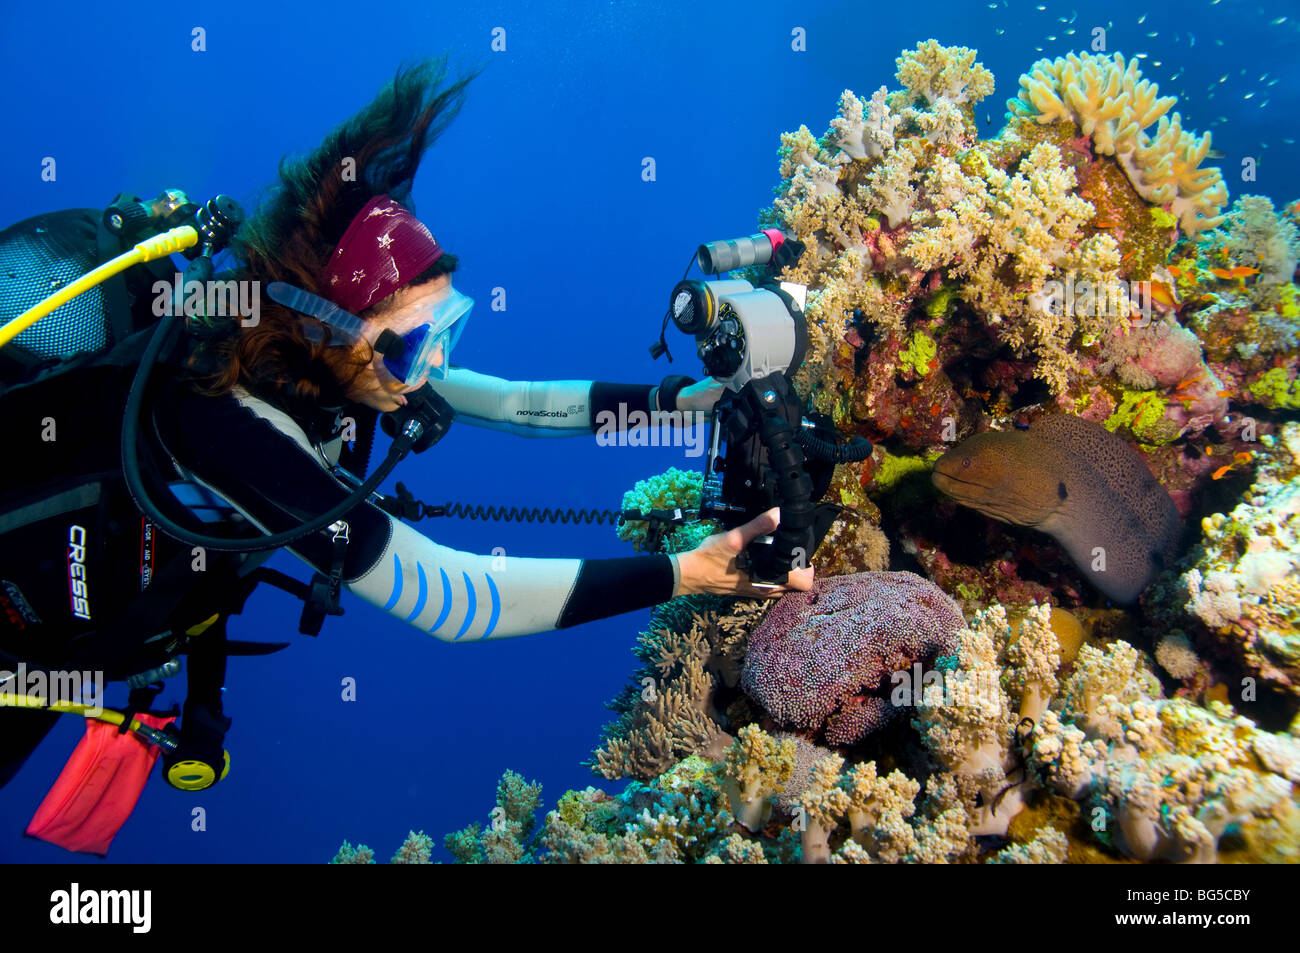 Underwater photographer scuba diving, ras mohammed, Egypt, colorful, moray eel, blue water, tropical reef, scuba, diving, ocean Stock Photo